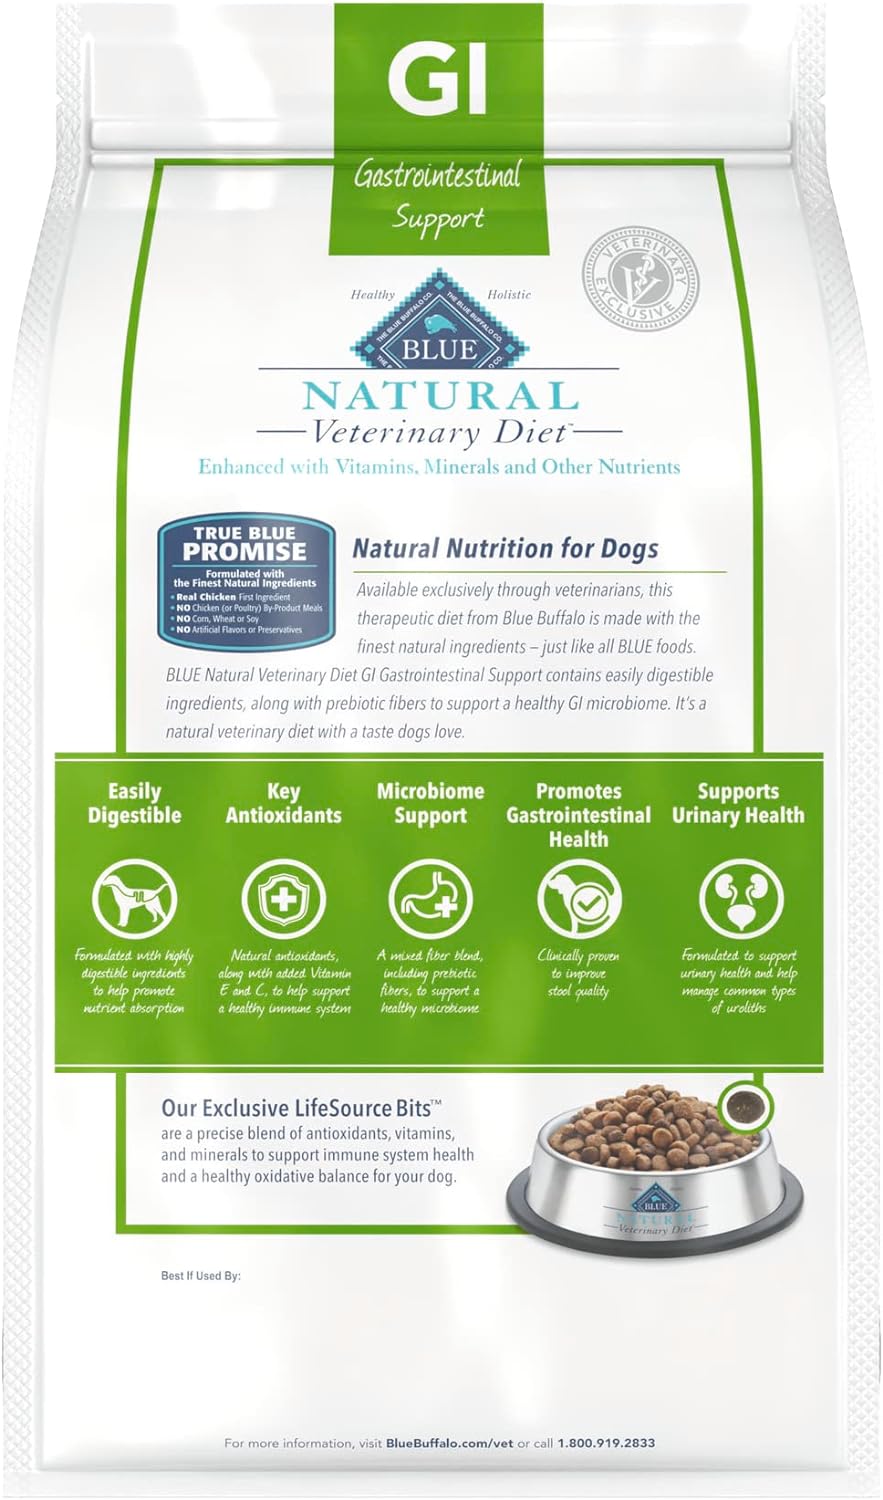 Blue Natural Veterinary Diet GI Gastrointestinal Support Dry Dog Food – Gallery Image 2